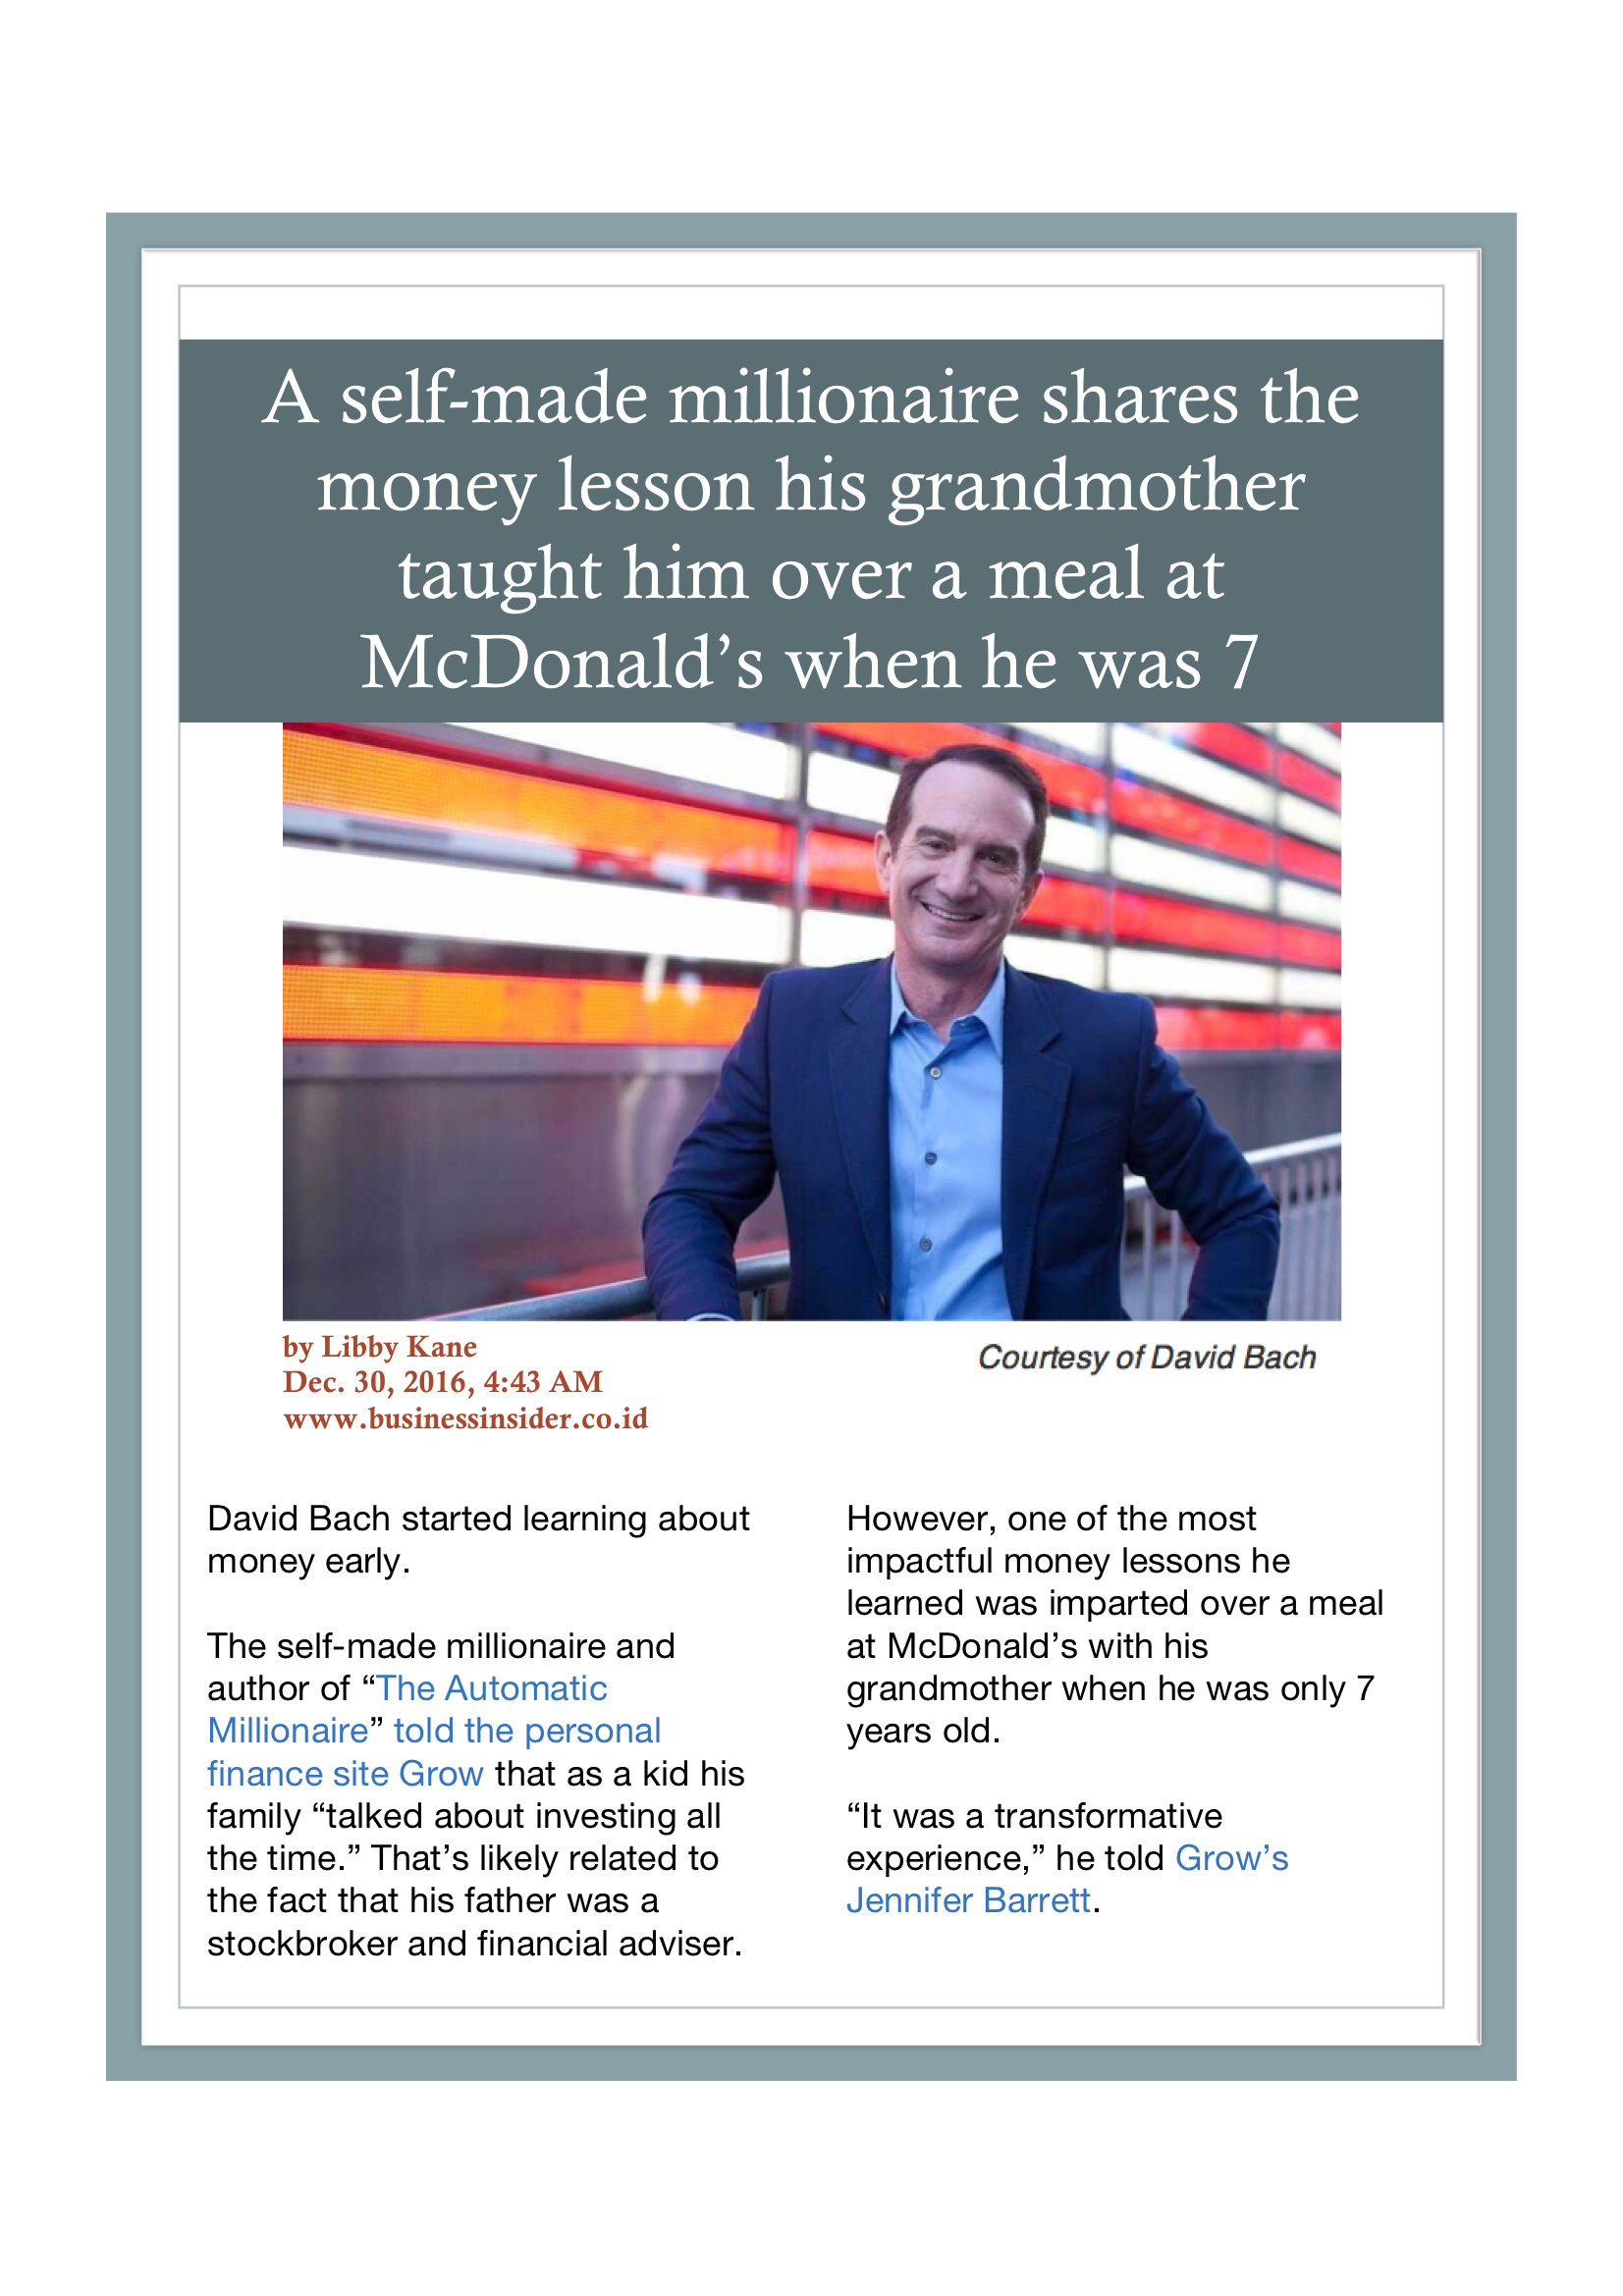 A Self-Made Millionaire Shares the Money Lesson His Grandmother Taught Him Over A Meal at McDonald’s When He Was 7